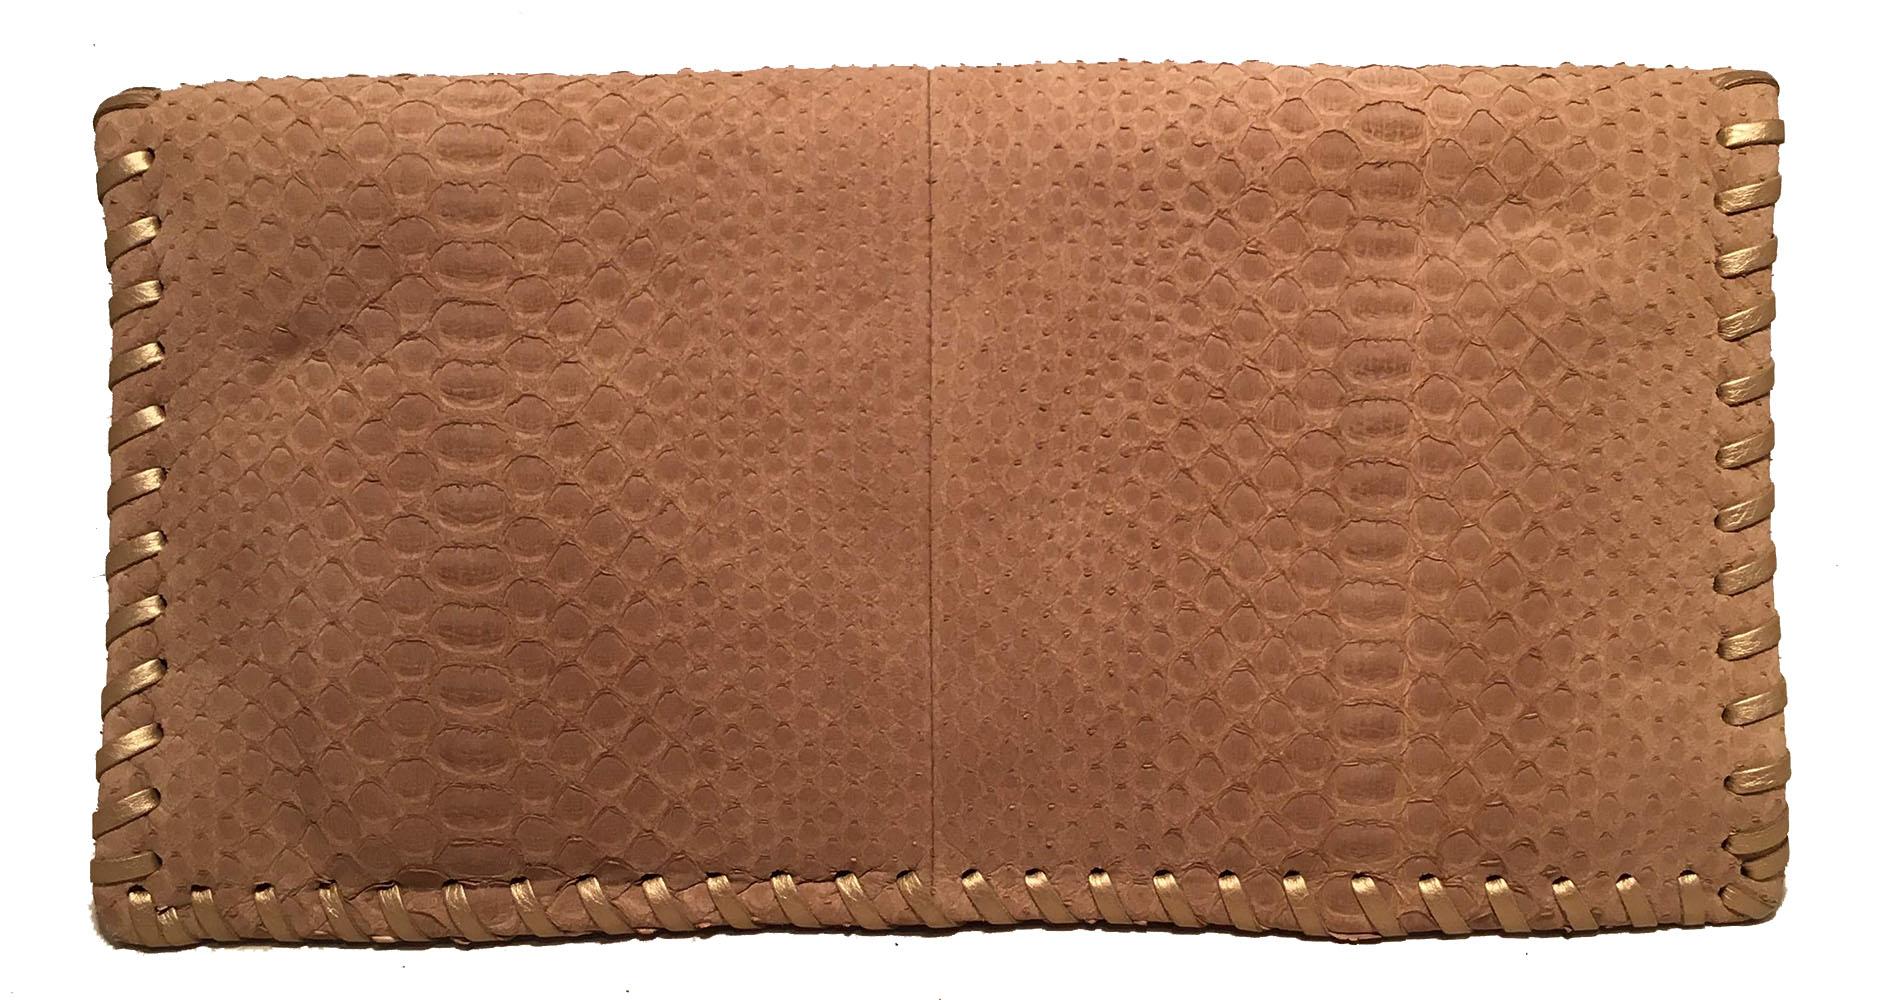 AMAZING Chanel Tan Snakeskin Leather Patch Gold Stitched Jeweled CC Fold Over Clutch in excellent condition. Tan snakeskin exterior trimmed with a tan leather CC logo along the front flap and gold leather wrap stitching along sides and patch logo.